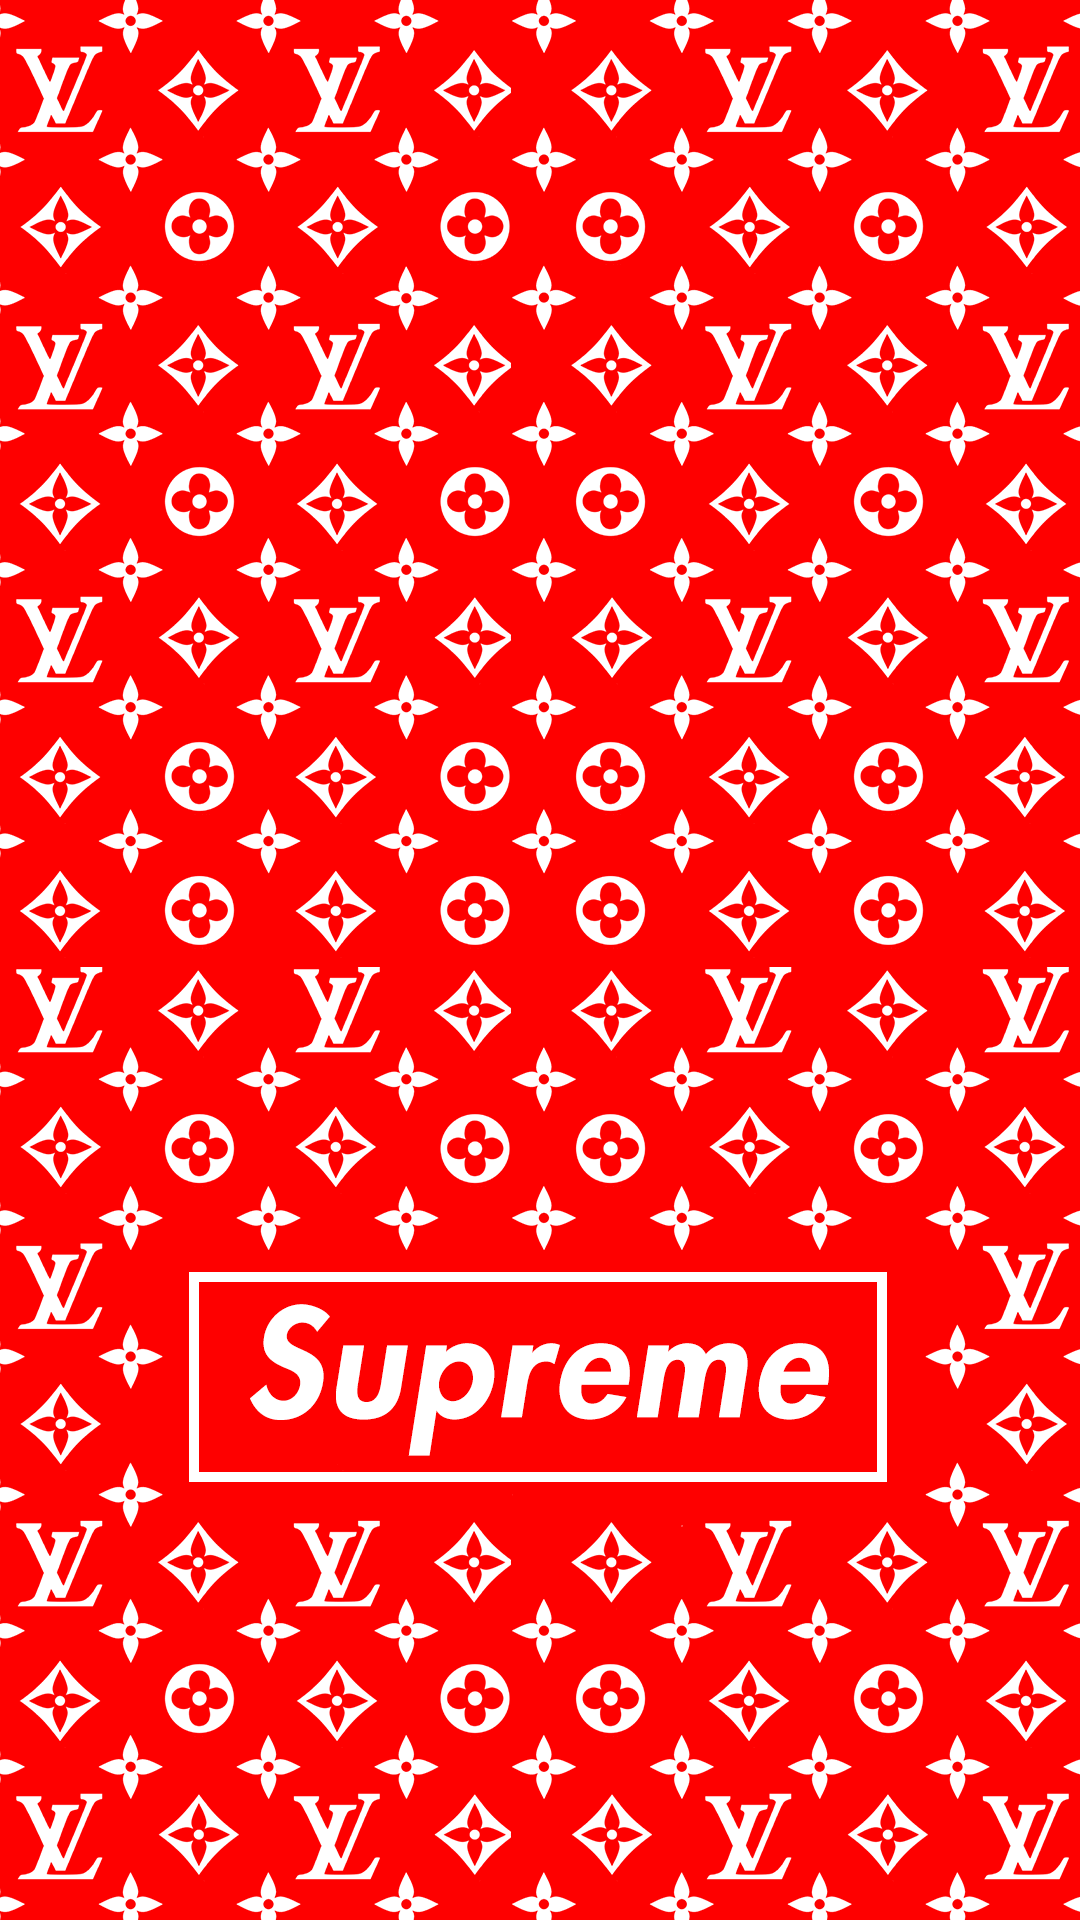 70+ Supreme Wallpapers in 4K